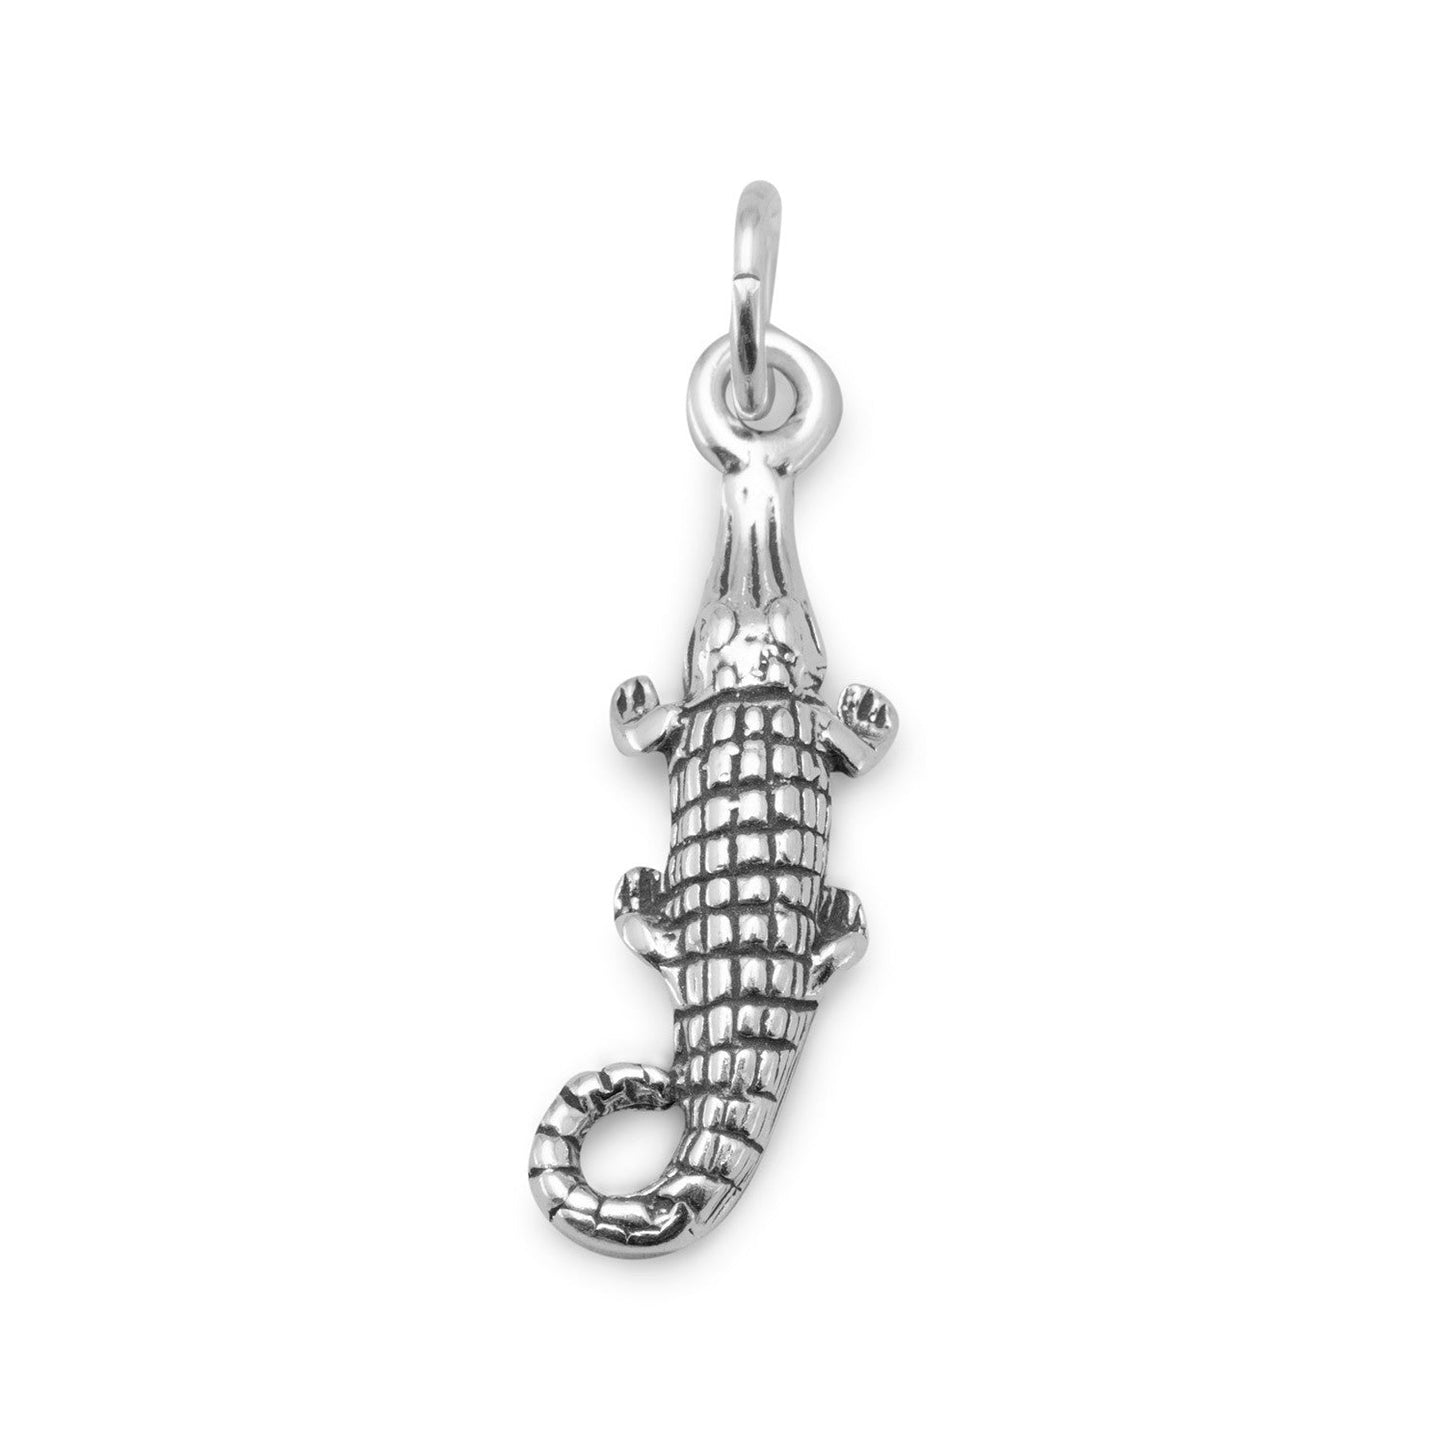 Oxidized Sterling Silver Alligator Charm, Made in USA